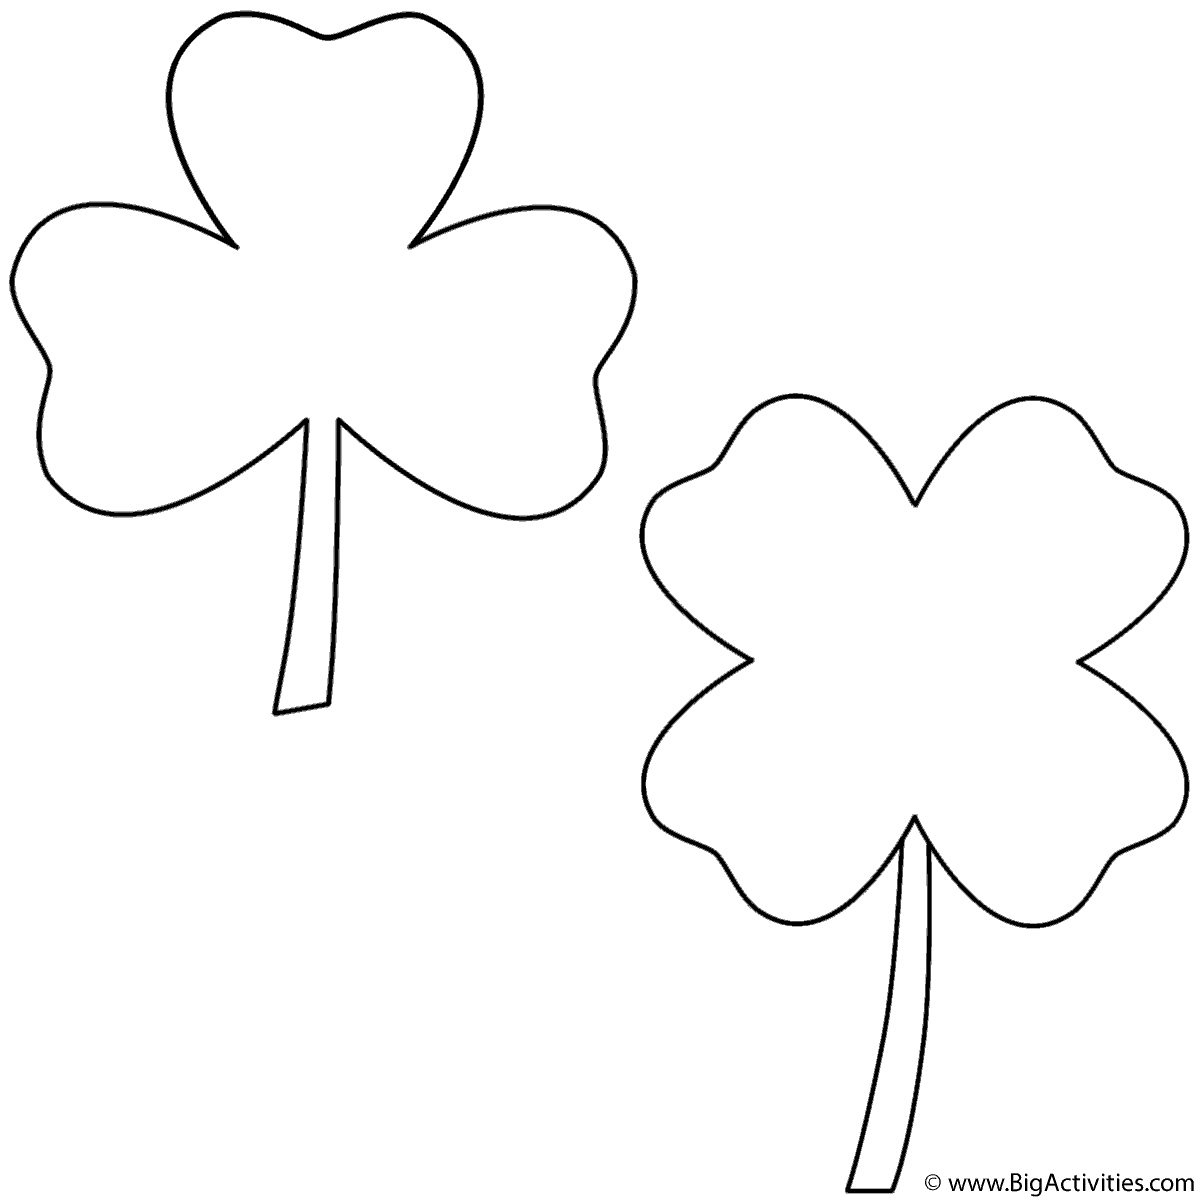 three-leaf-clover-and-four-leaf-clover-coloring-page-st-patrick-s-day